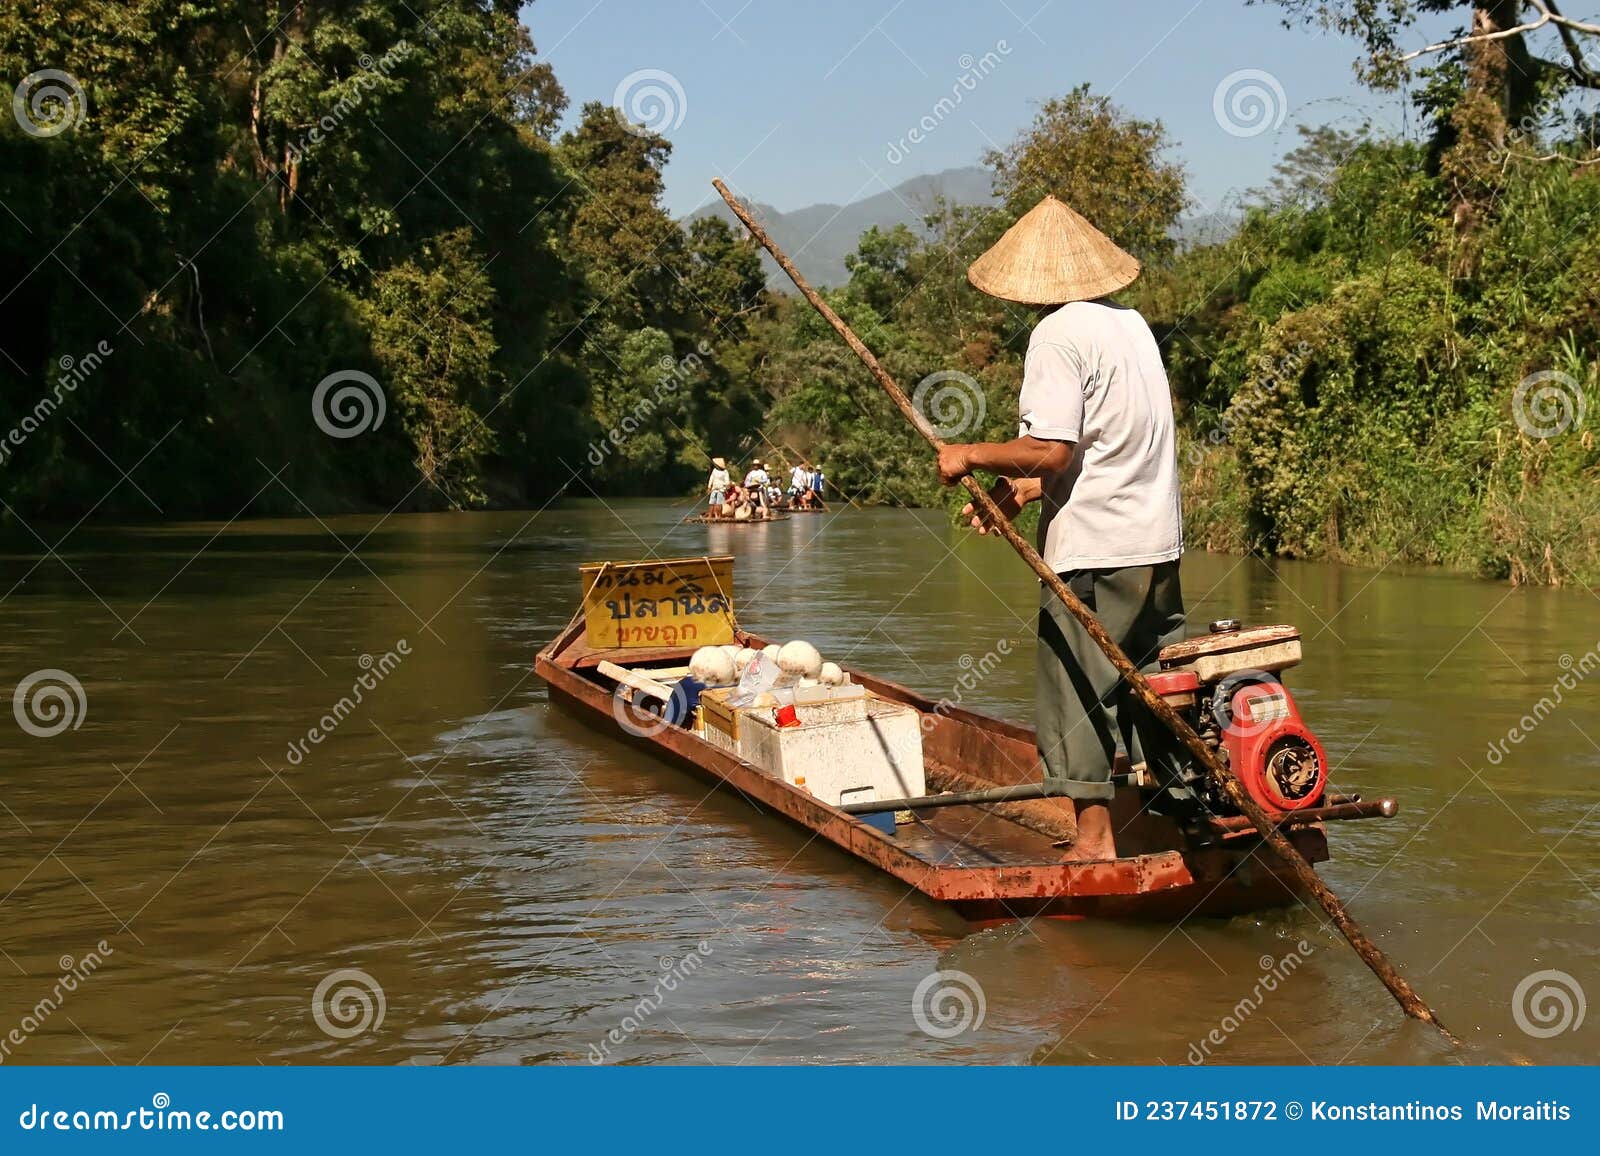 boatman sell`s food in the river